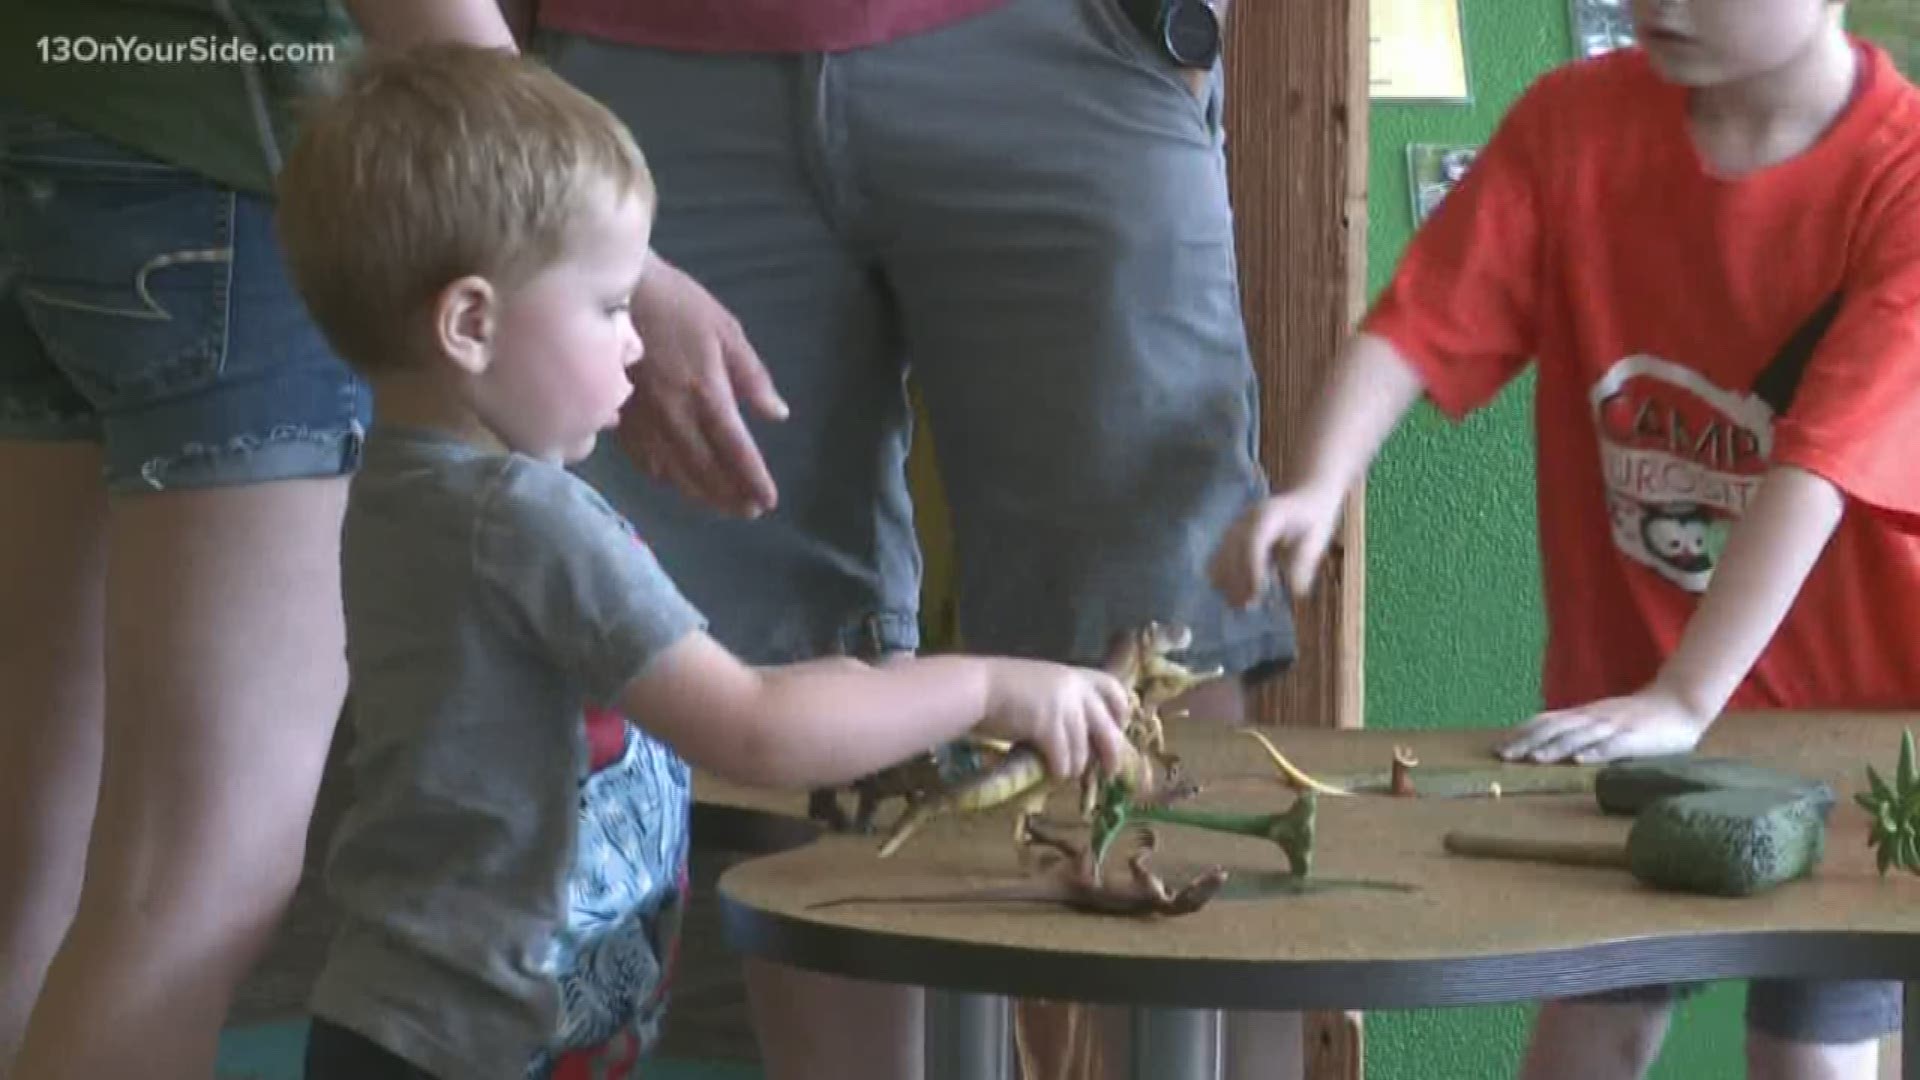 The Grand Rapids Children's Museum is rooted in the belief that learning can come through hands-on fun and play, and the dinosaur exhibit allows for that.